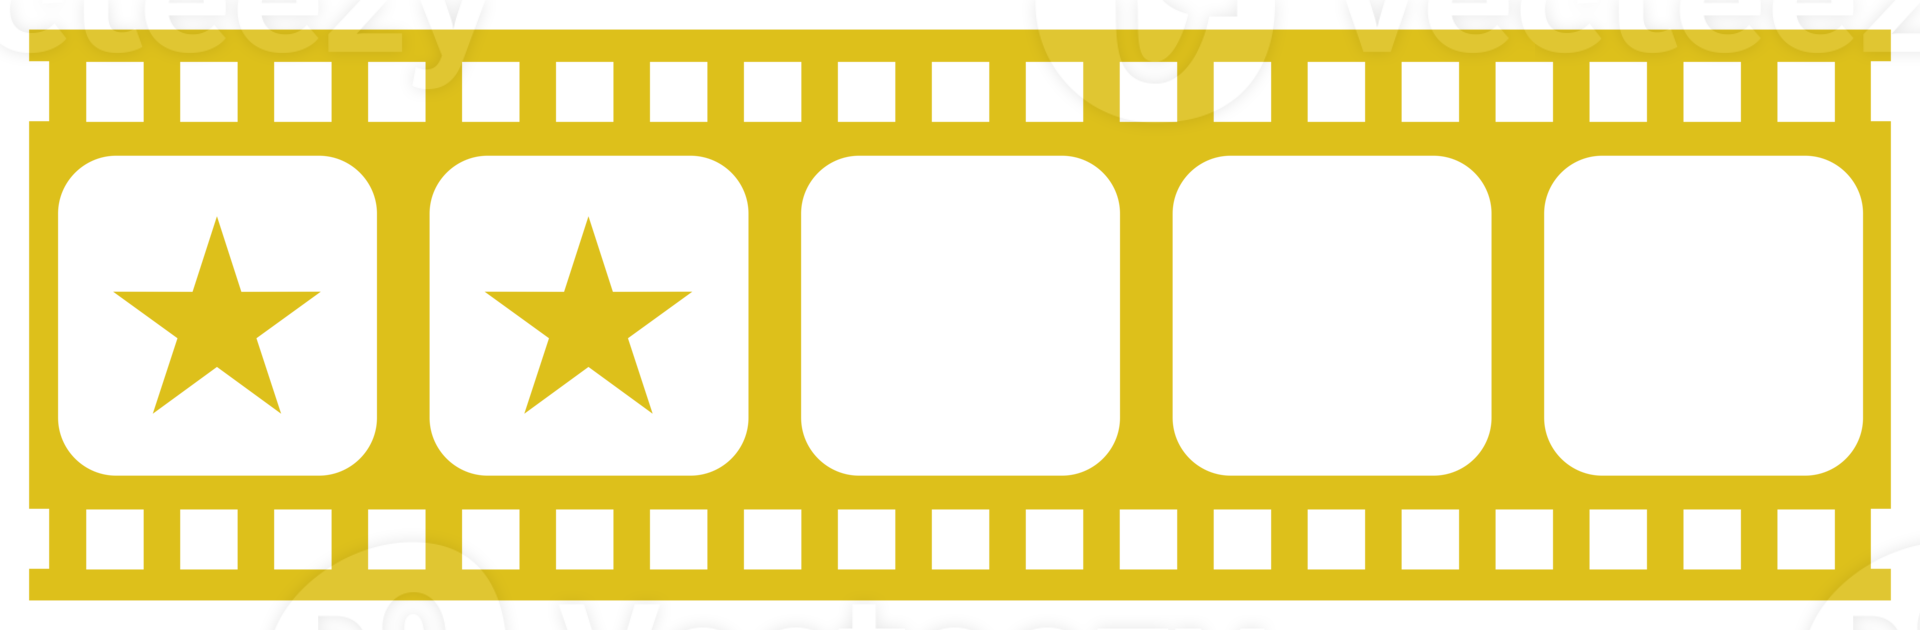 Visual of the Five 5 Star Sign in the Film Stripe Silhouette. Star Rating Icon Symbol for Film or Movie Review, Pictogram, Apps, Website or Graphic Design Element. Rating 2 Star. Format PNG